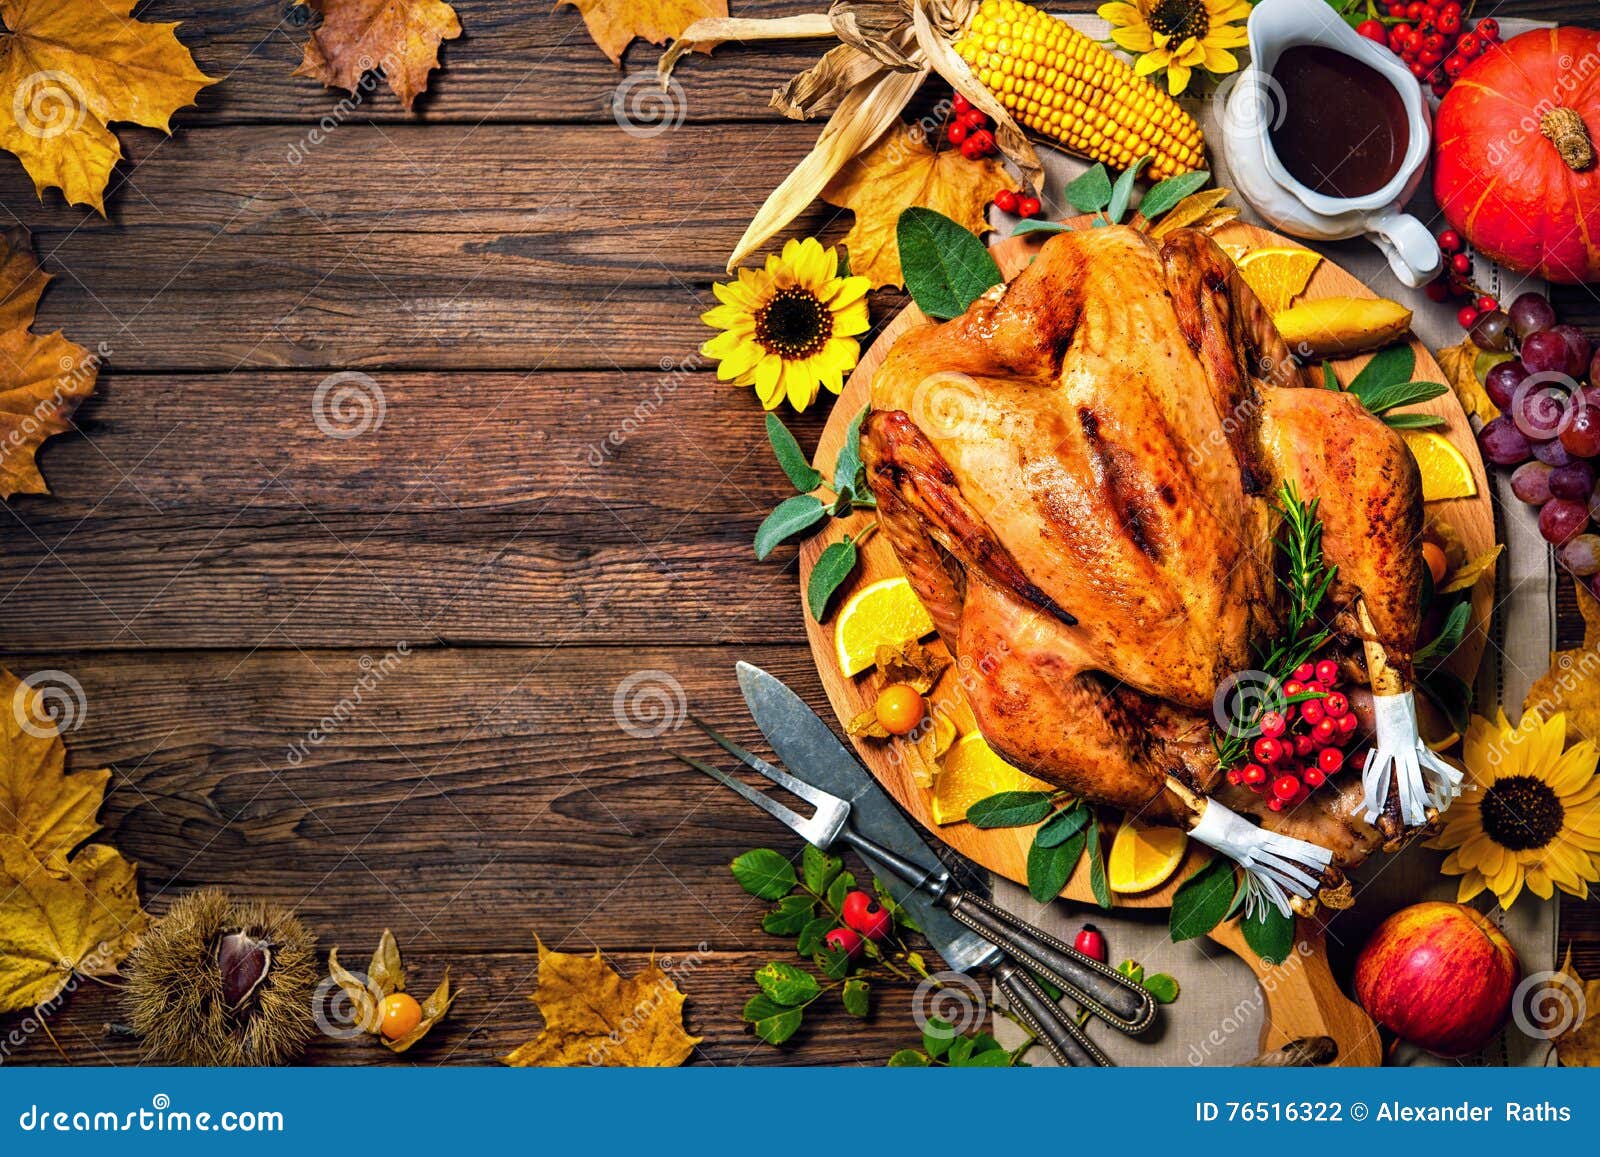 Roasted Thanksgiving Turkey Stock Photo - Image of dinner, holiday ...